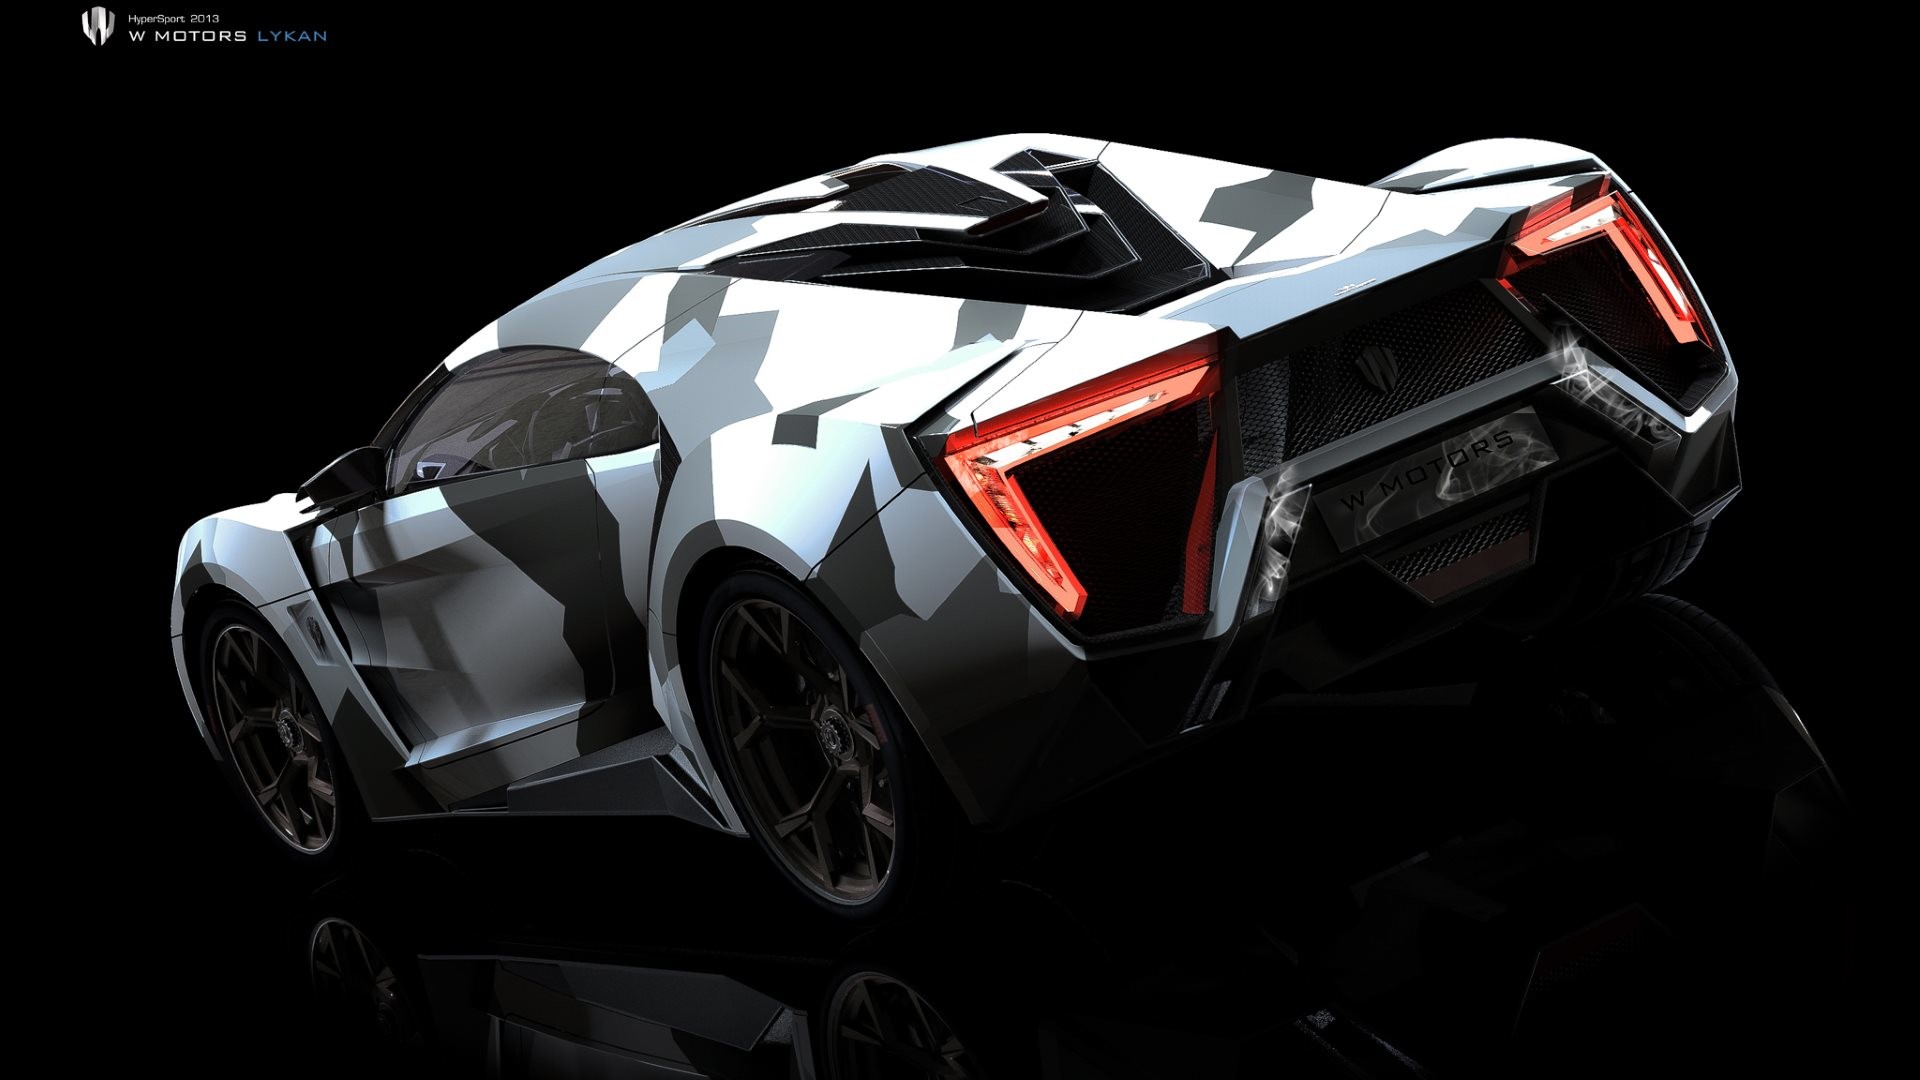 1920x1080 The 4th HD Wallpaper with Lykan Hypersport car